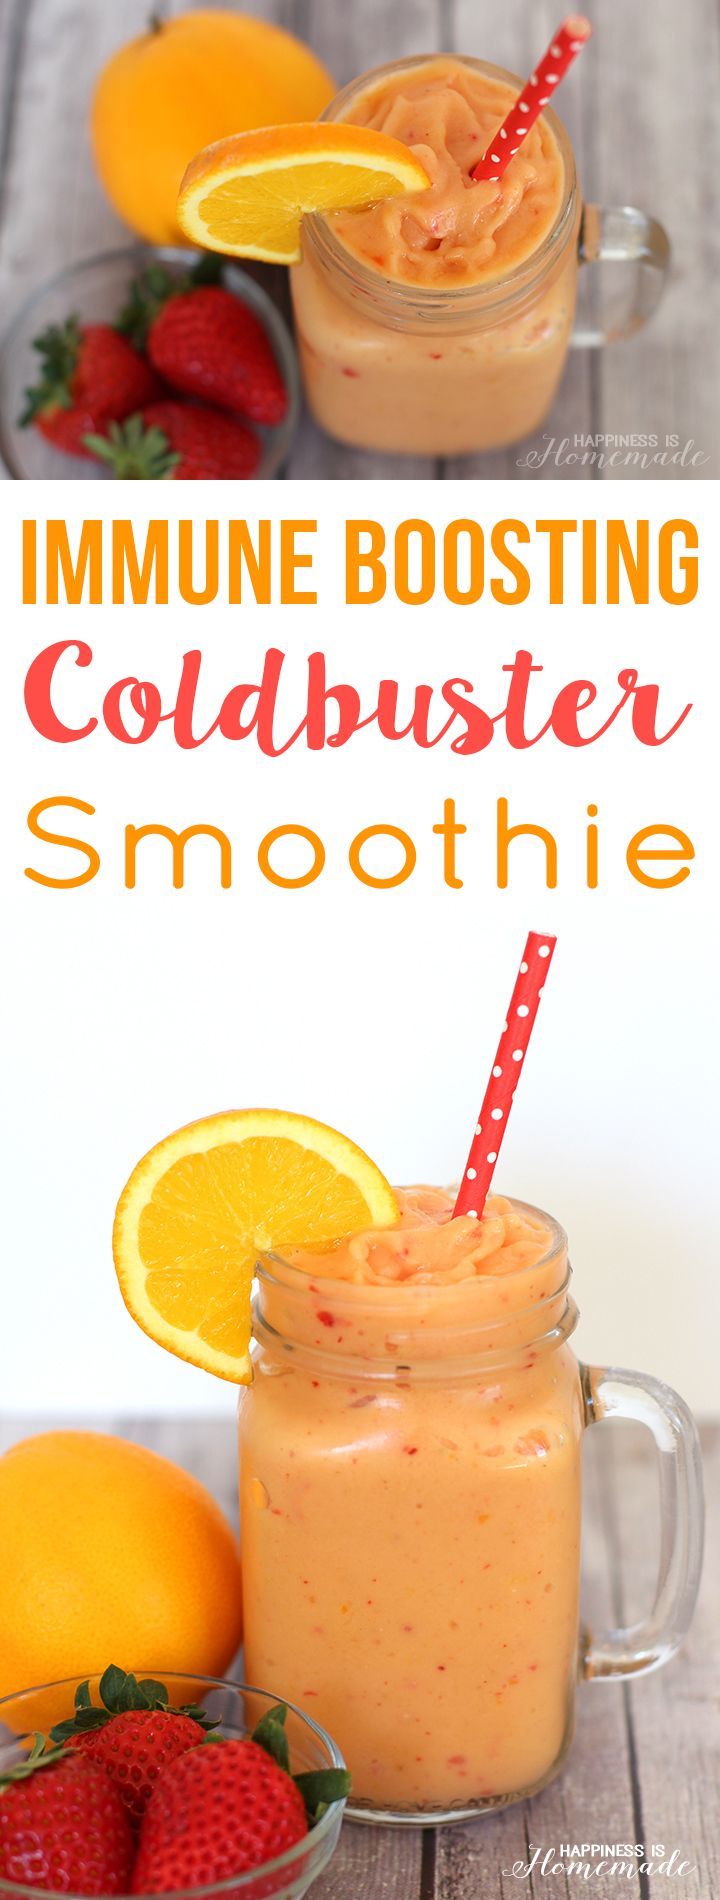 Stay healthy this cold and flu season with this delicious immunity boosting smooth